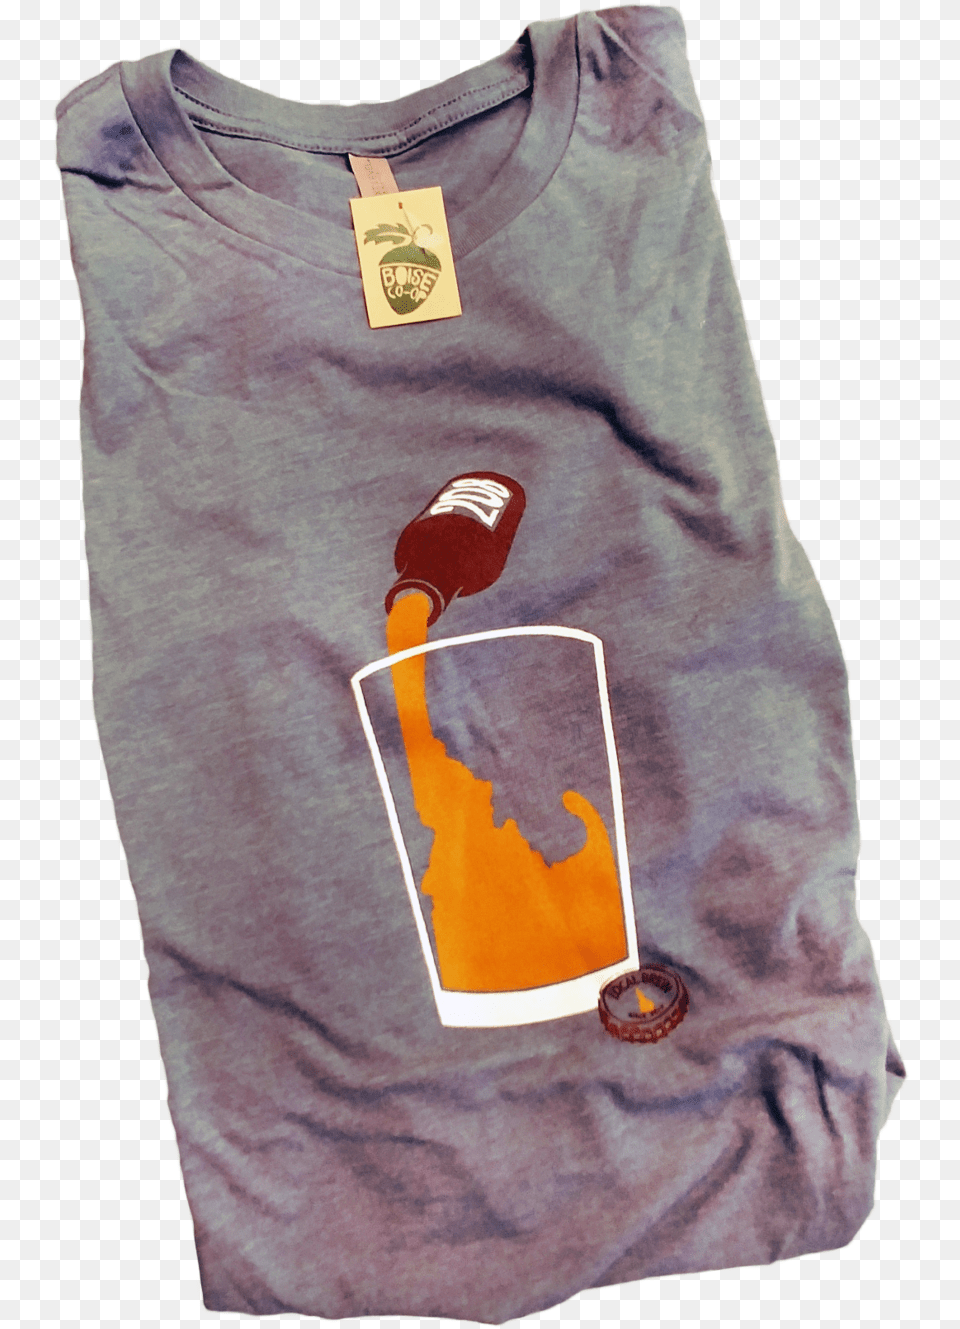 Pocket, Clothing, T-shirt, Person, Stain Png